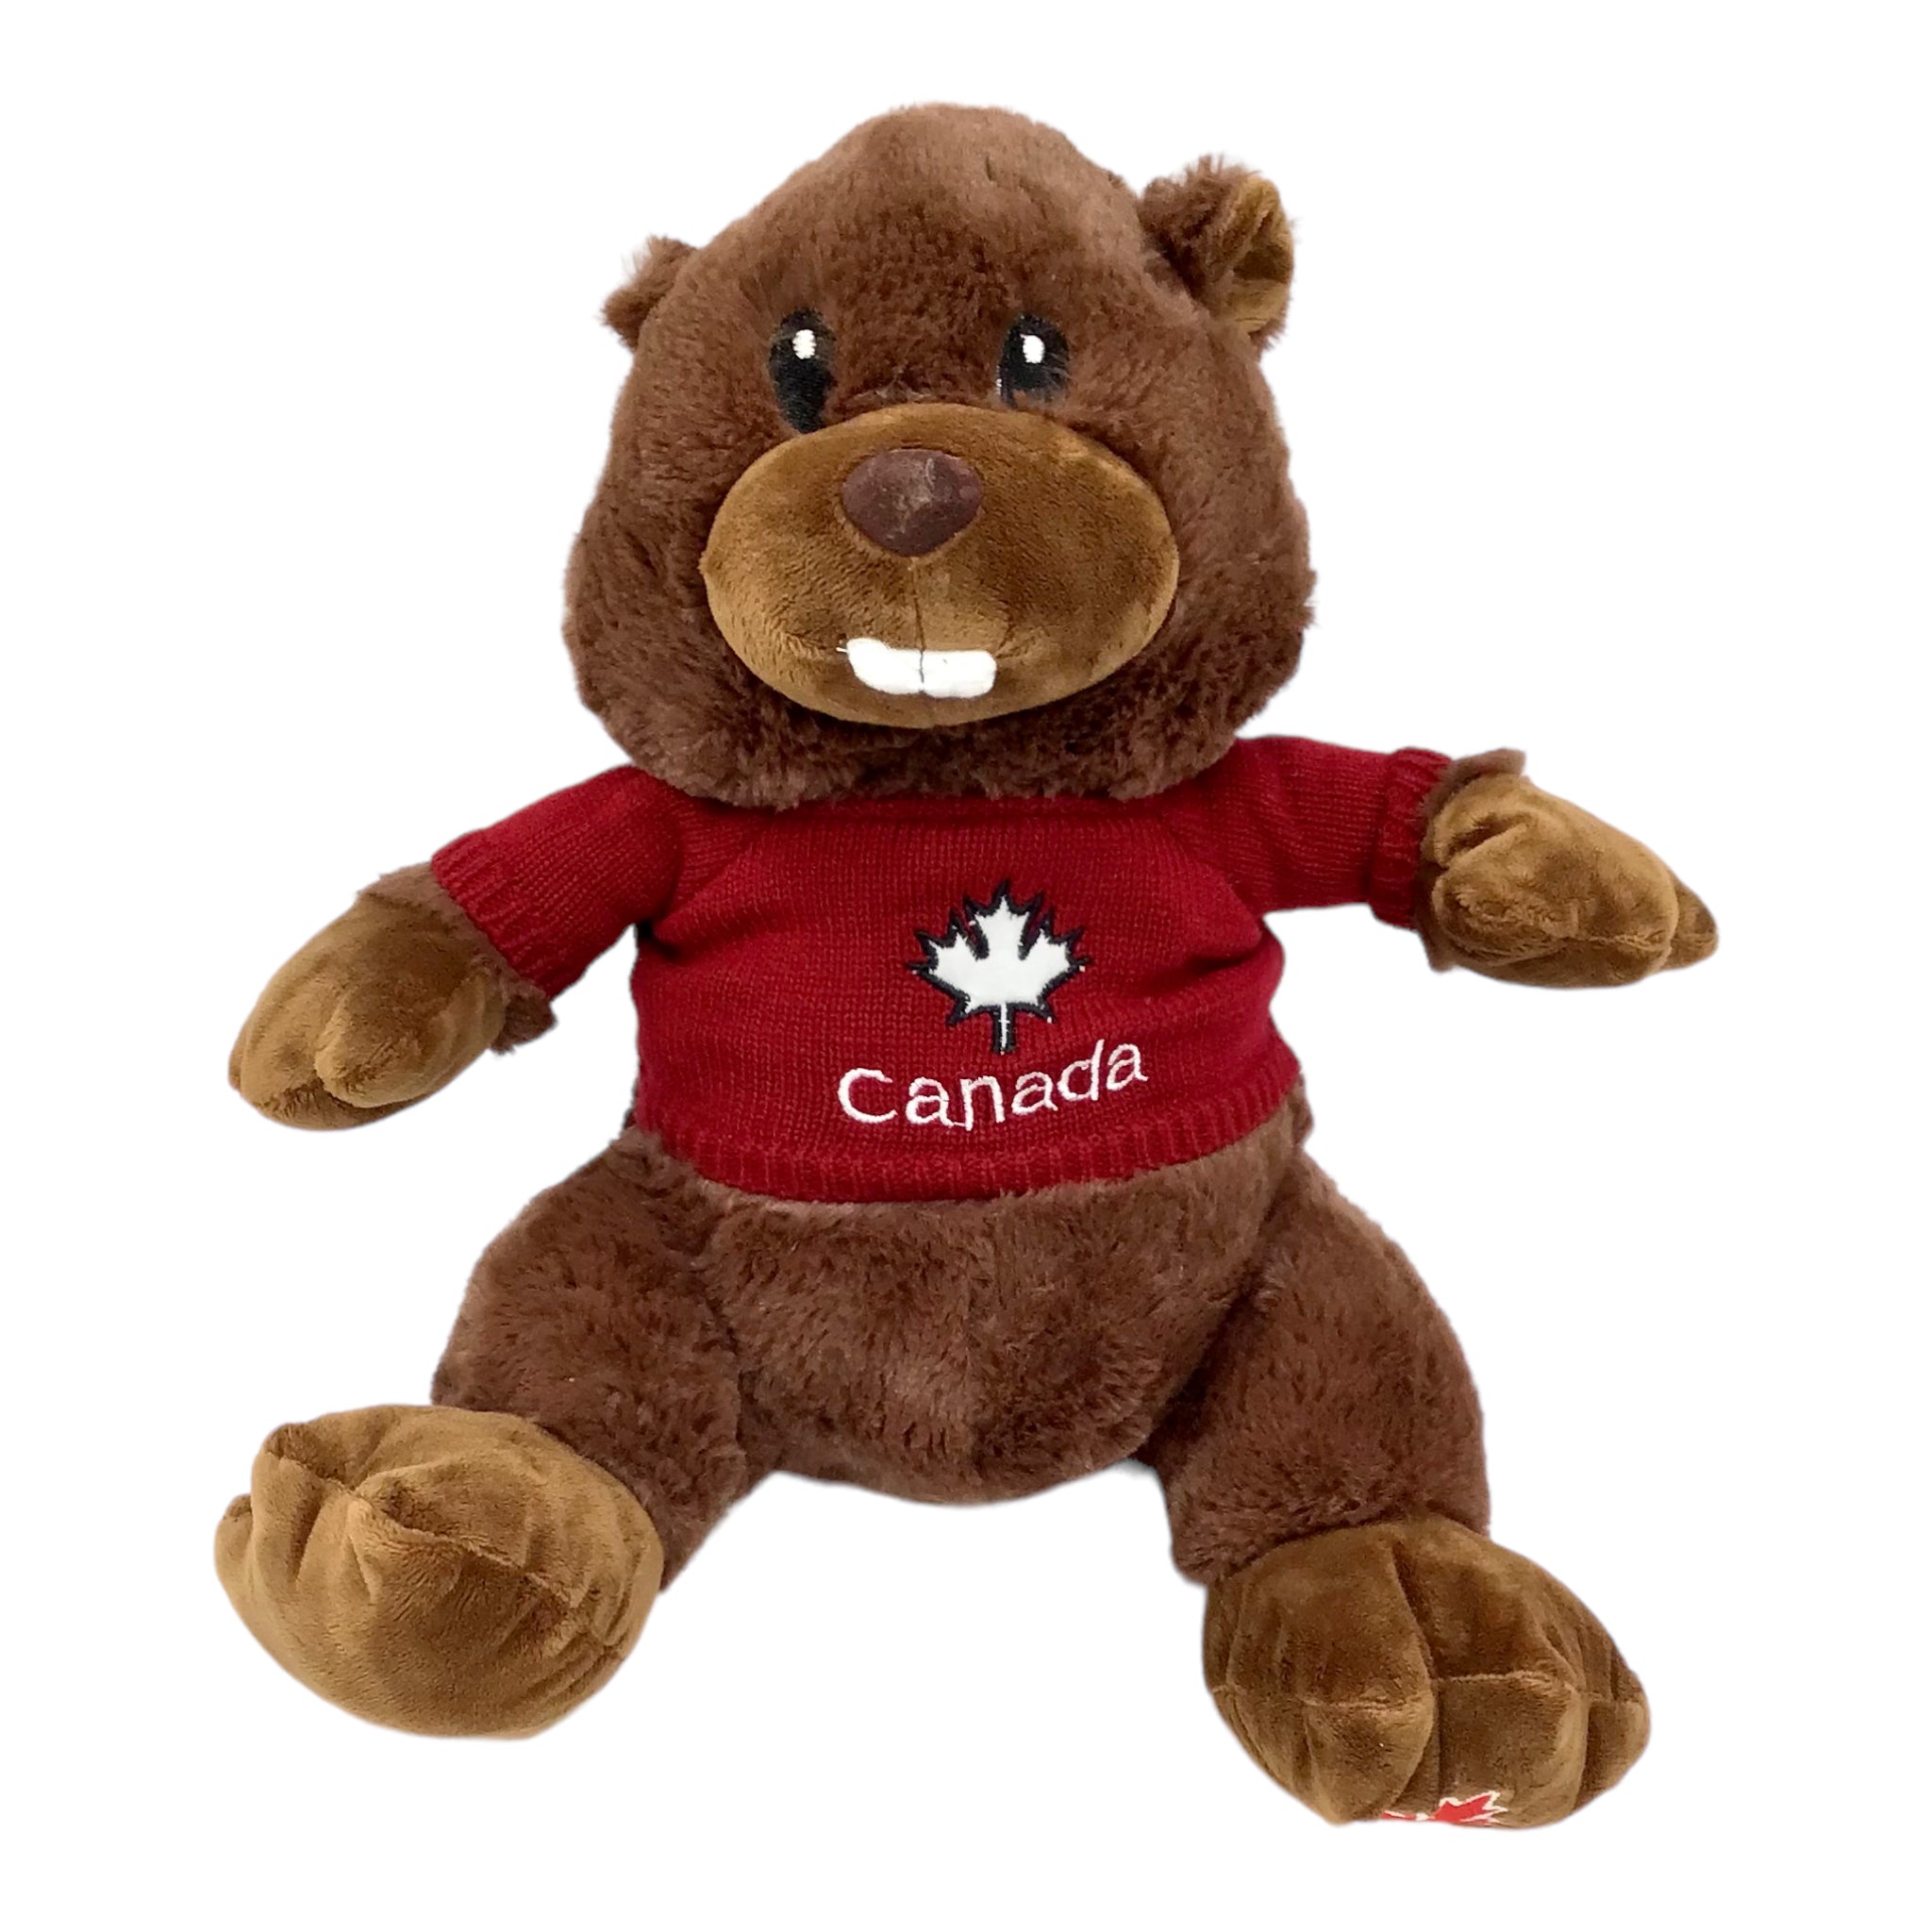 Canada Wild Life Animal Beaver Plush W/ Red Maple Leaf Sweater, Stuffed Animal, Plush Toy, Gifts for Kids, 13 Inches